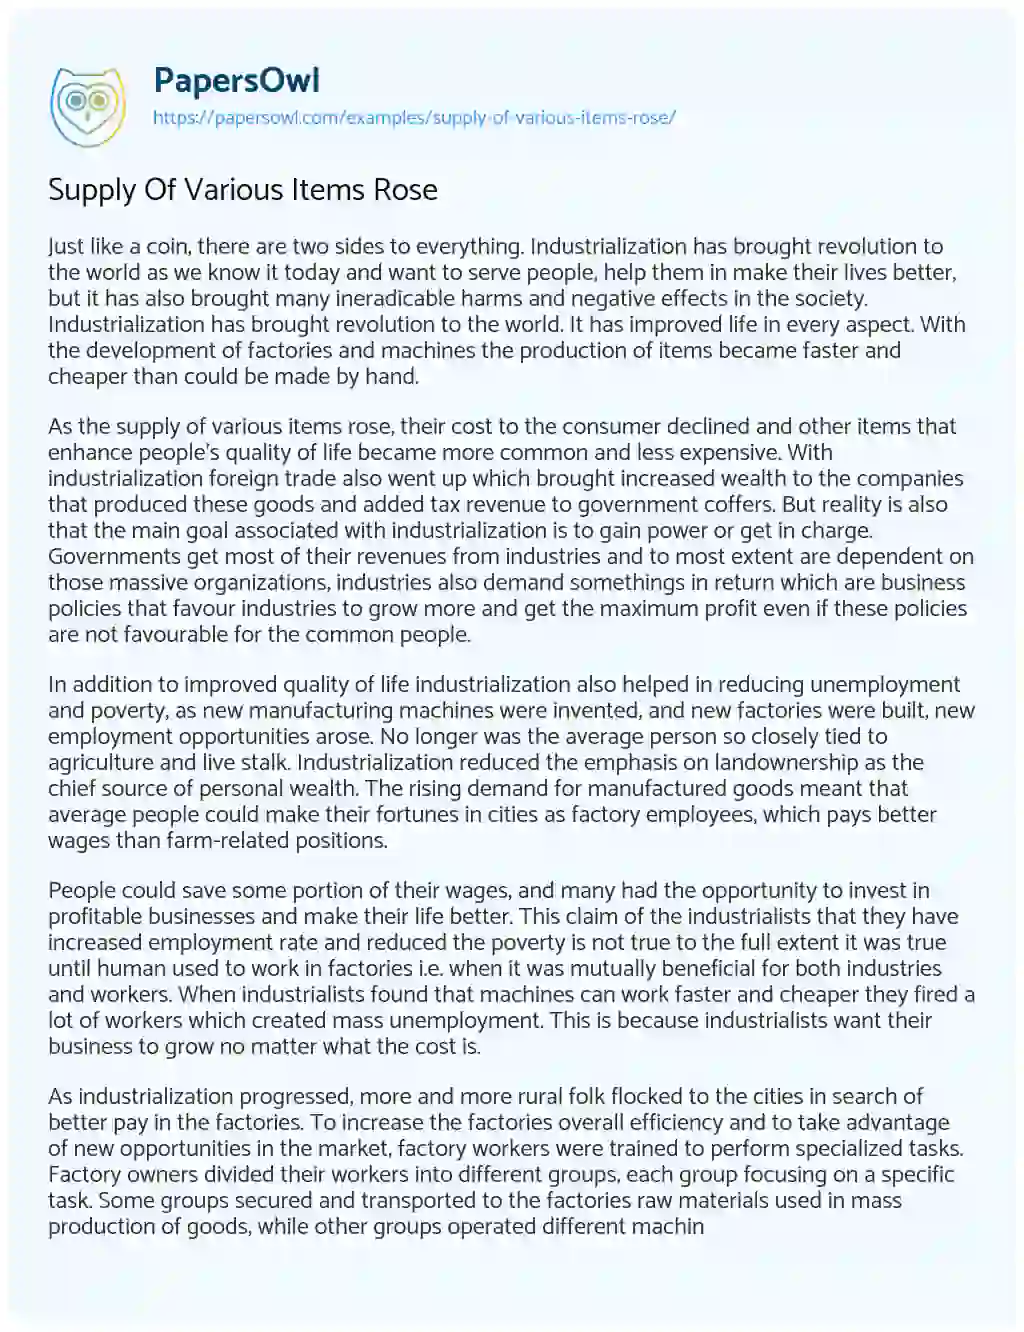 Essay on Supply of Various Items Rose